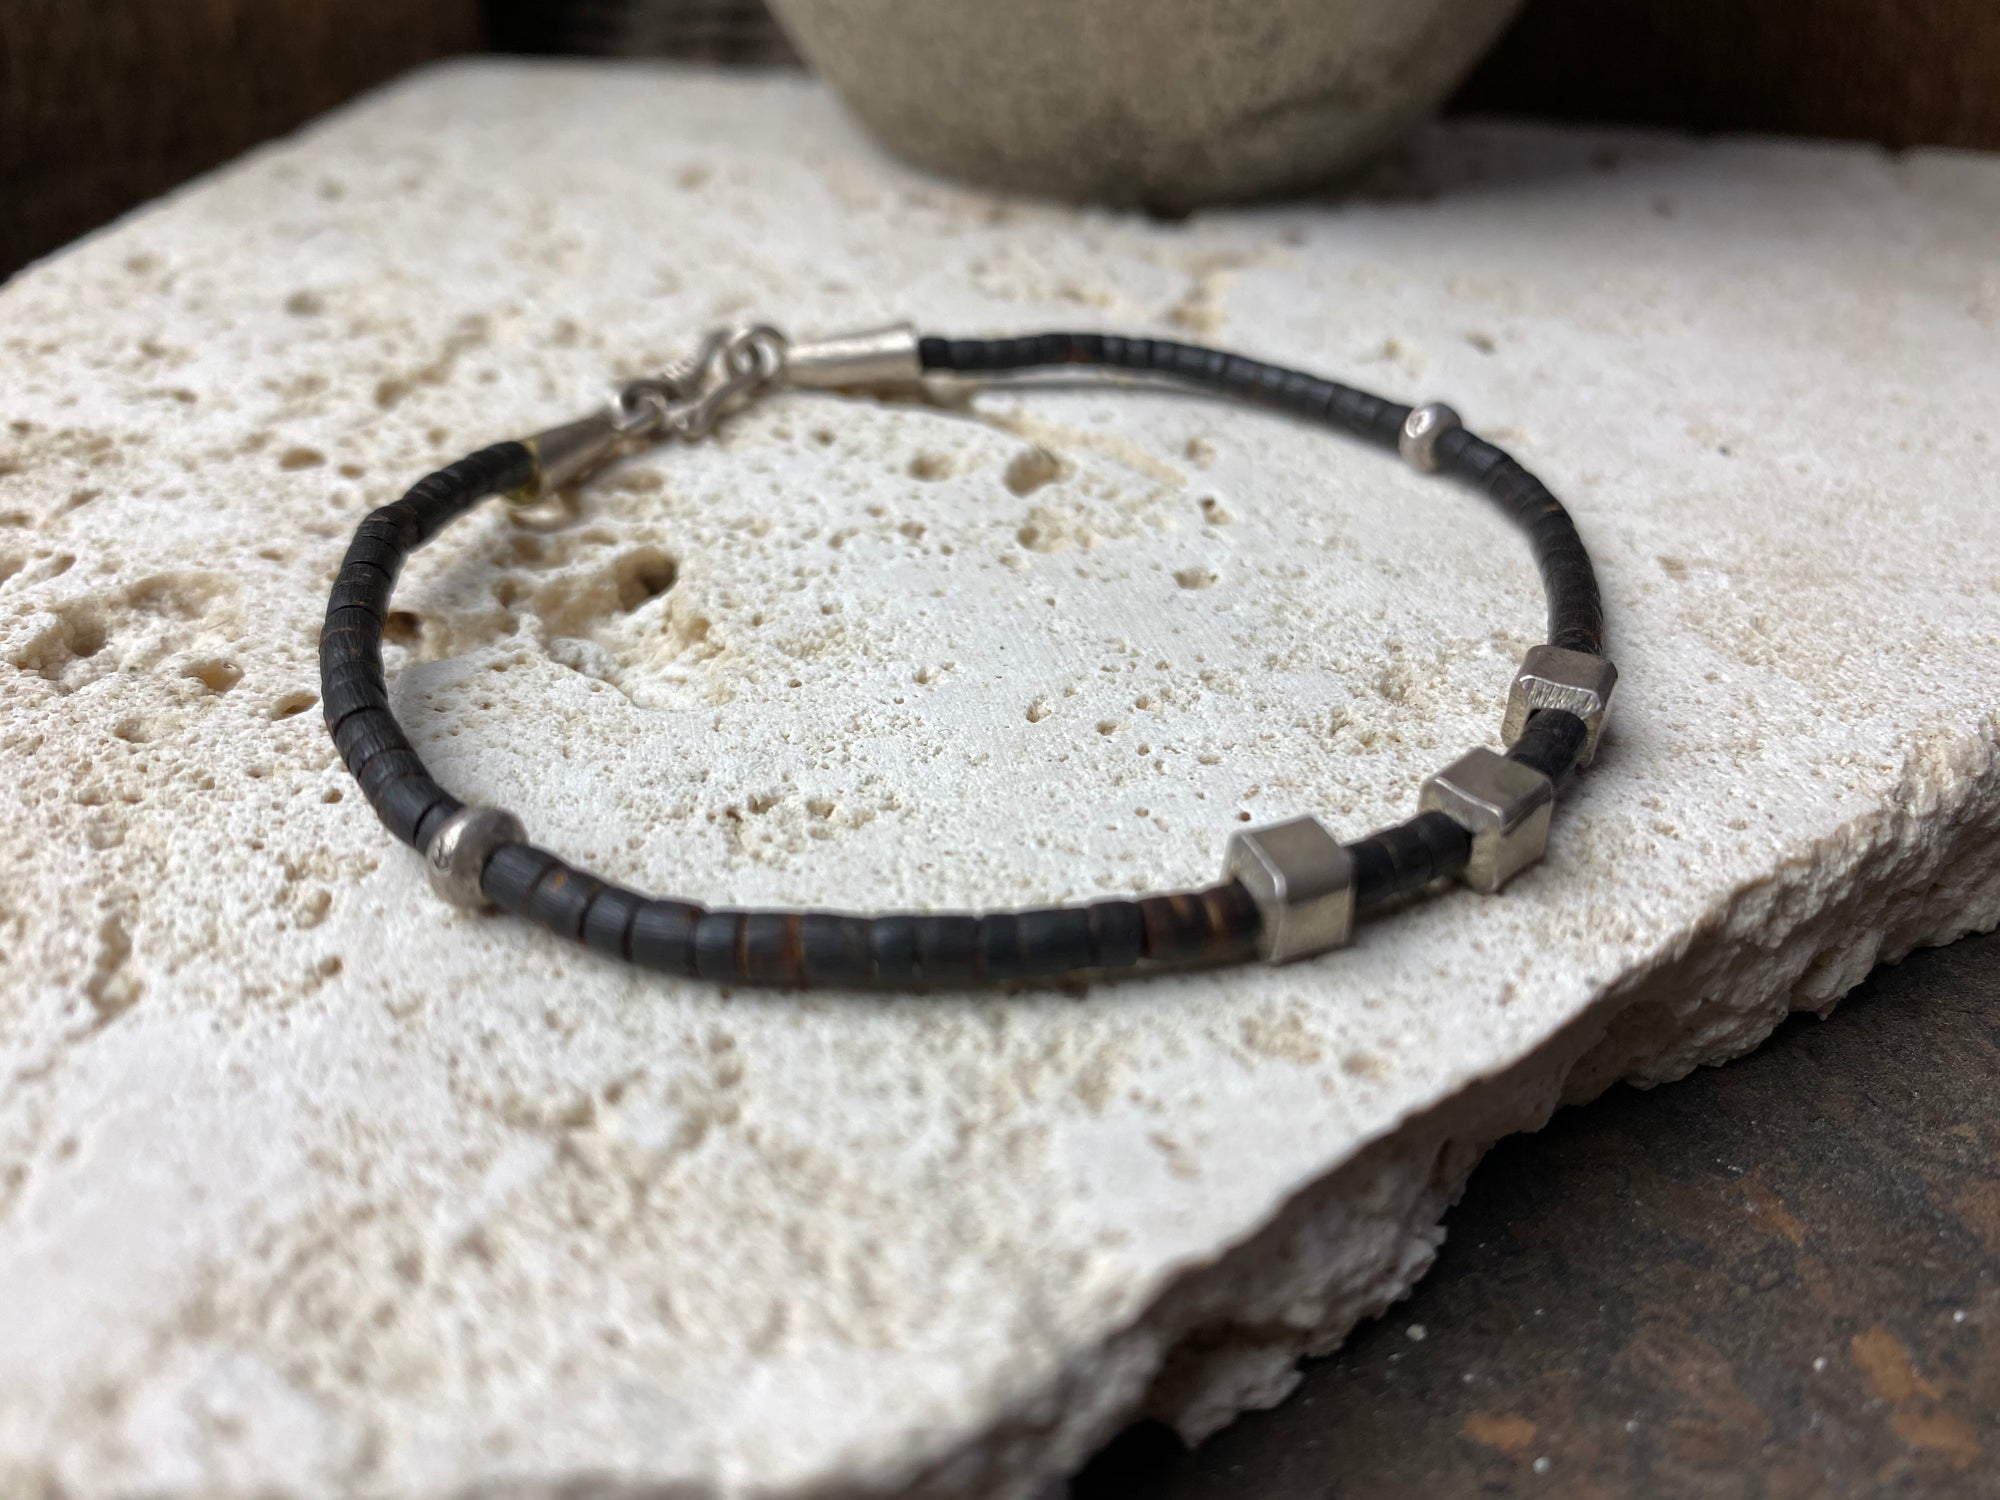 Our women or men's bracelet is made from fine cut coconut wood and hilltribe 95% pure silver. This Boho style bracelet is made from coconut wood beads and hill tribe 95% silver. Our tribal bracelets are understated, chic and modern, and are made for that stacked bracelet look.